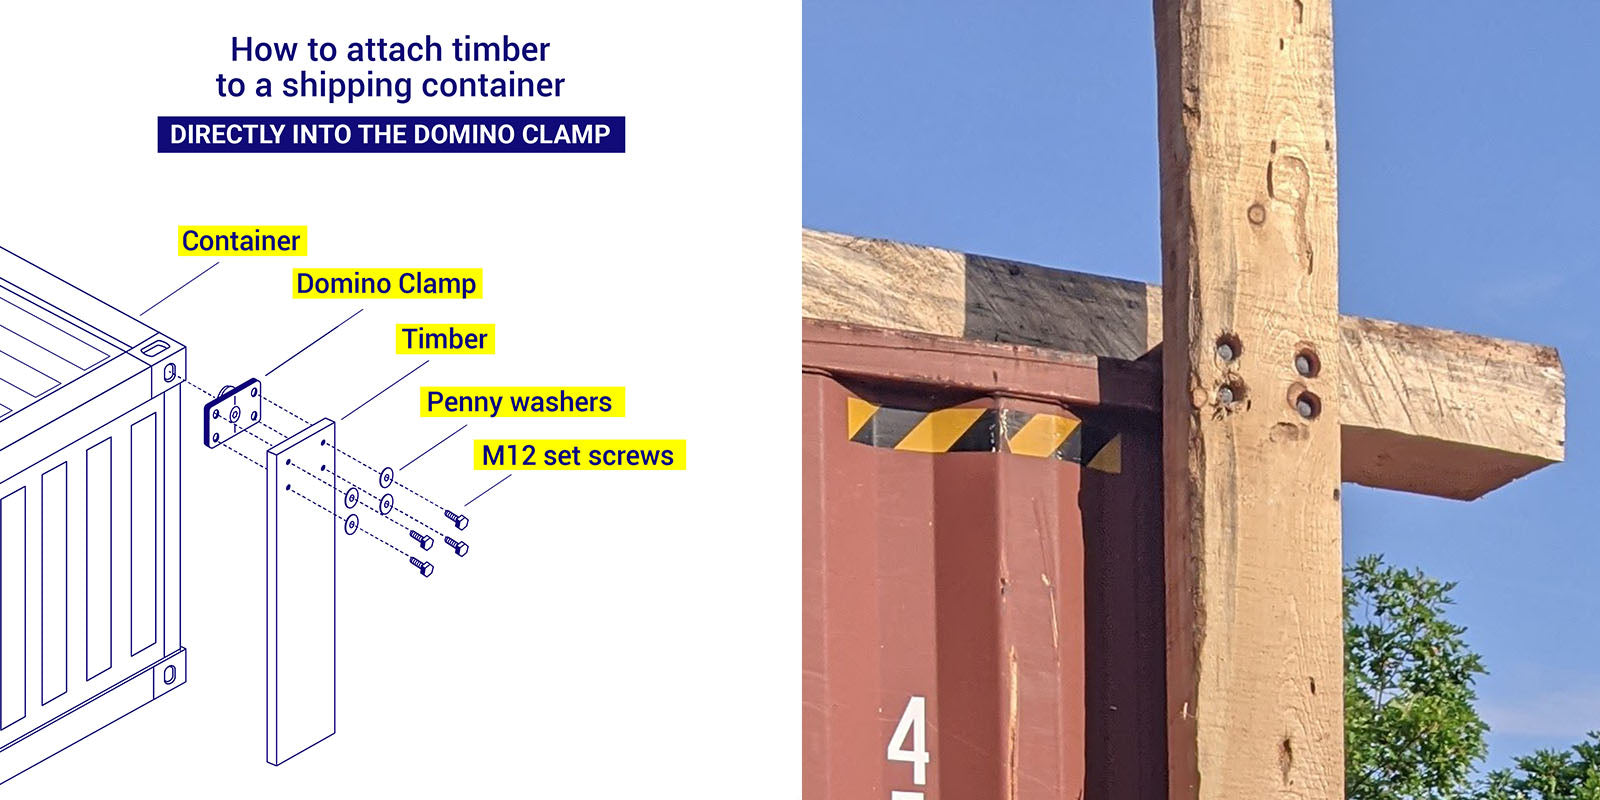 Attaching timber directly to the domino clamp